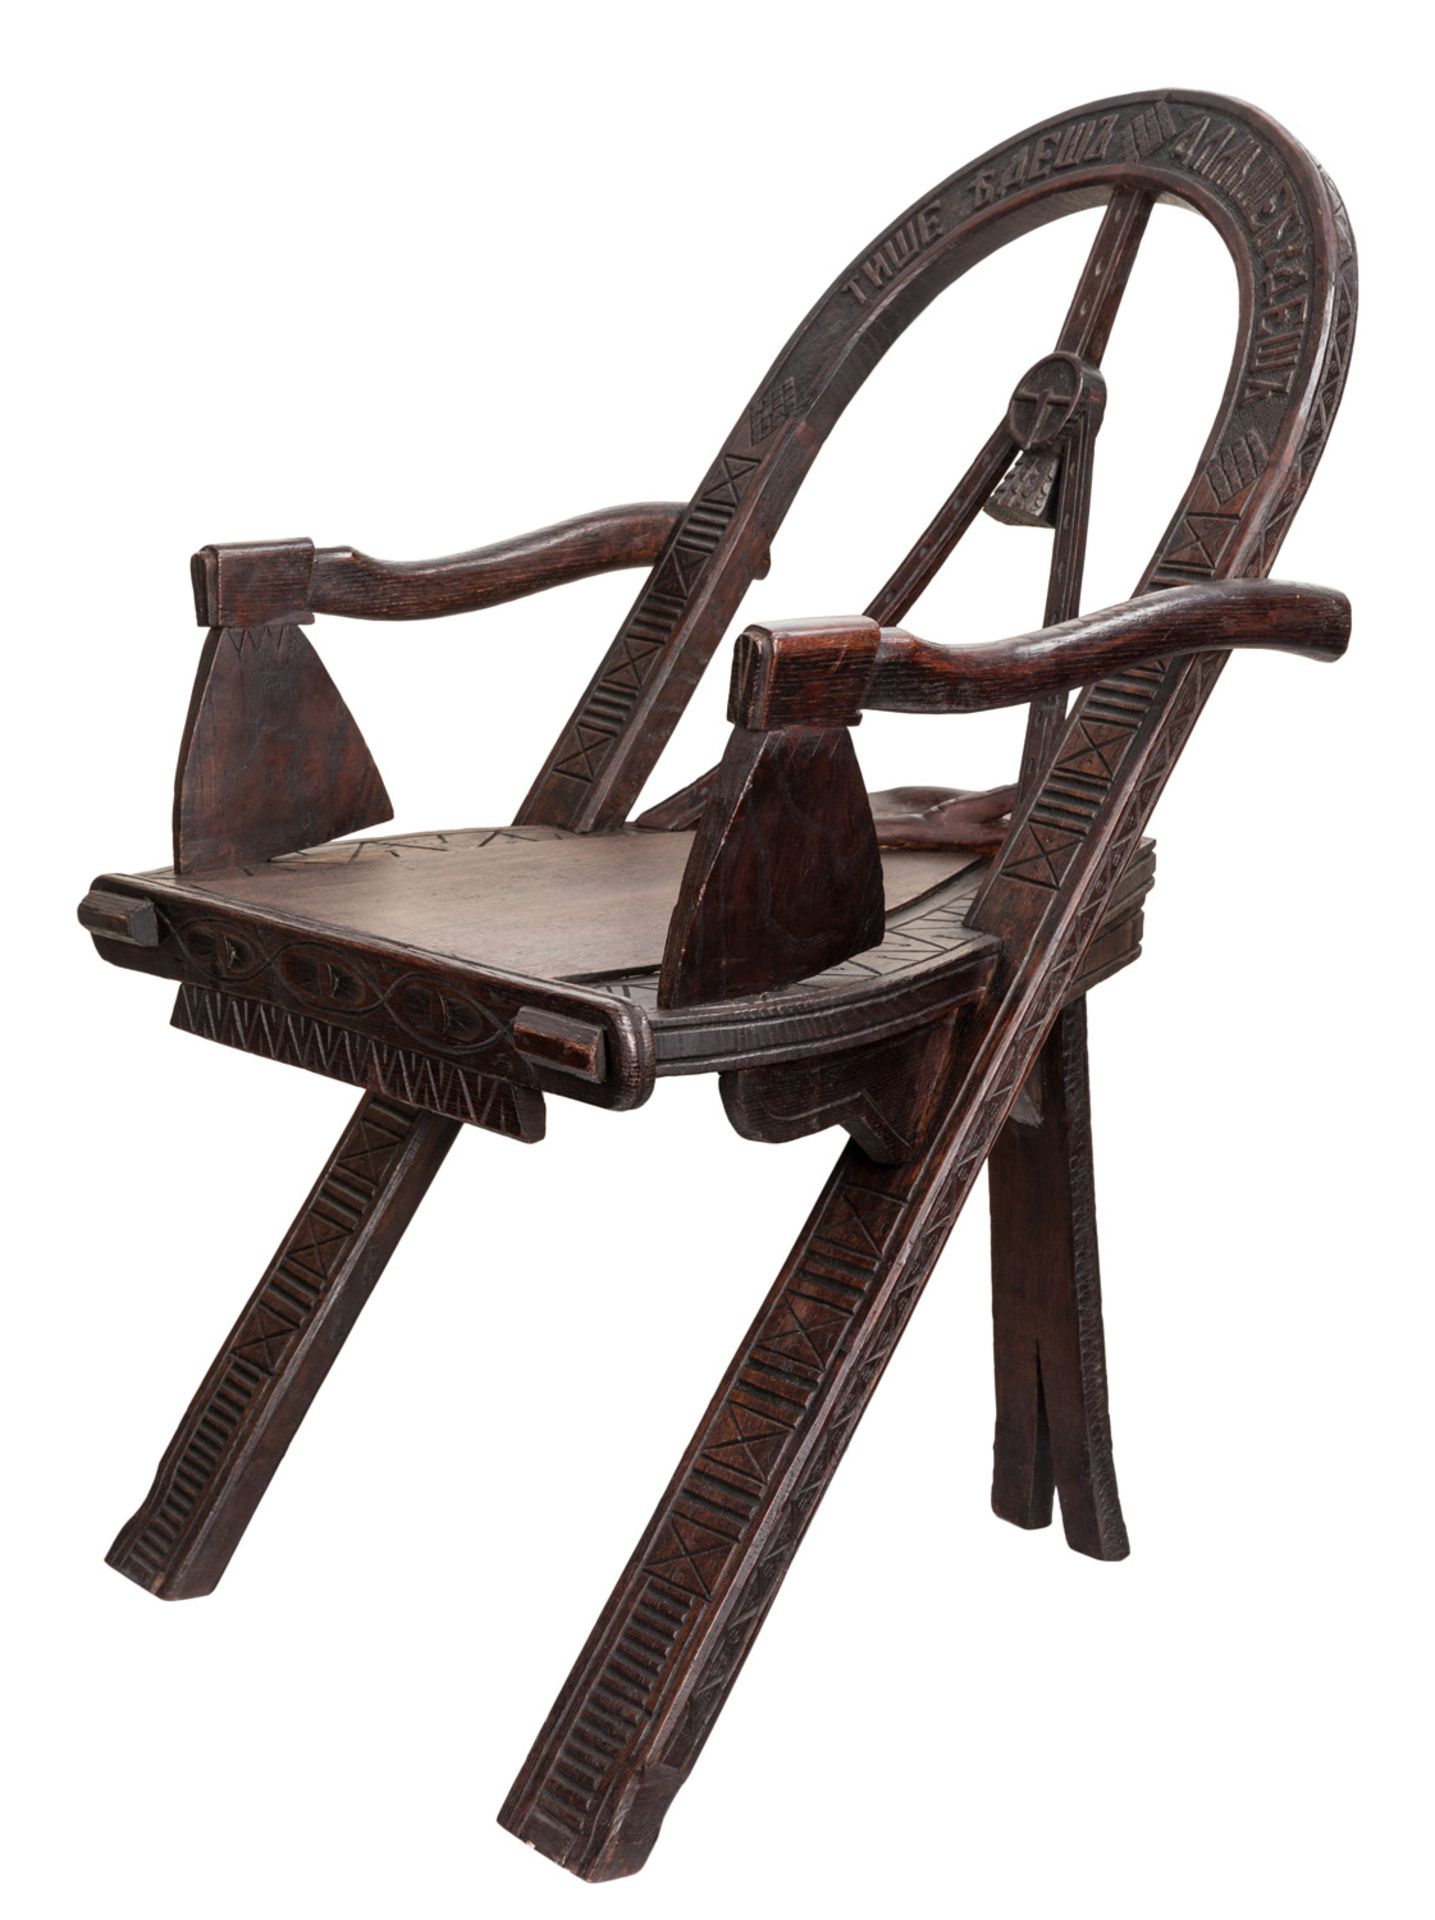 A RUSSIAN CARVED OAK CHAIR AFTER THE DESIGN BY VASILI PETROVICH SHUTOV (RUSSIAN 1826-1887)19TH CENT.